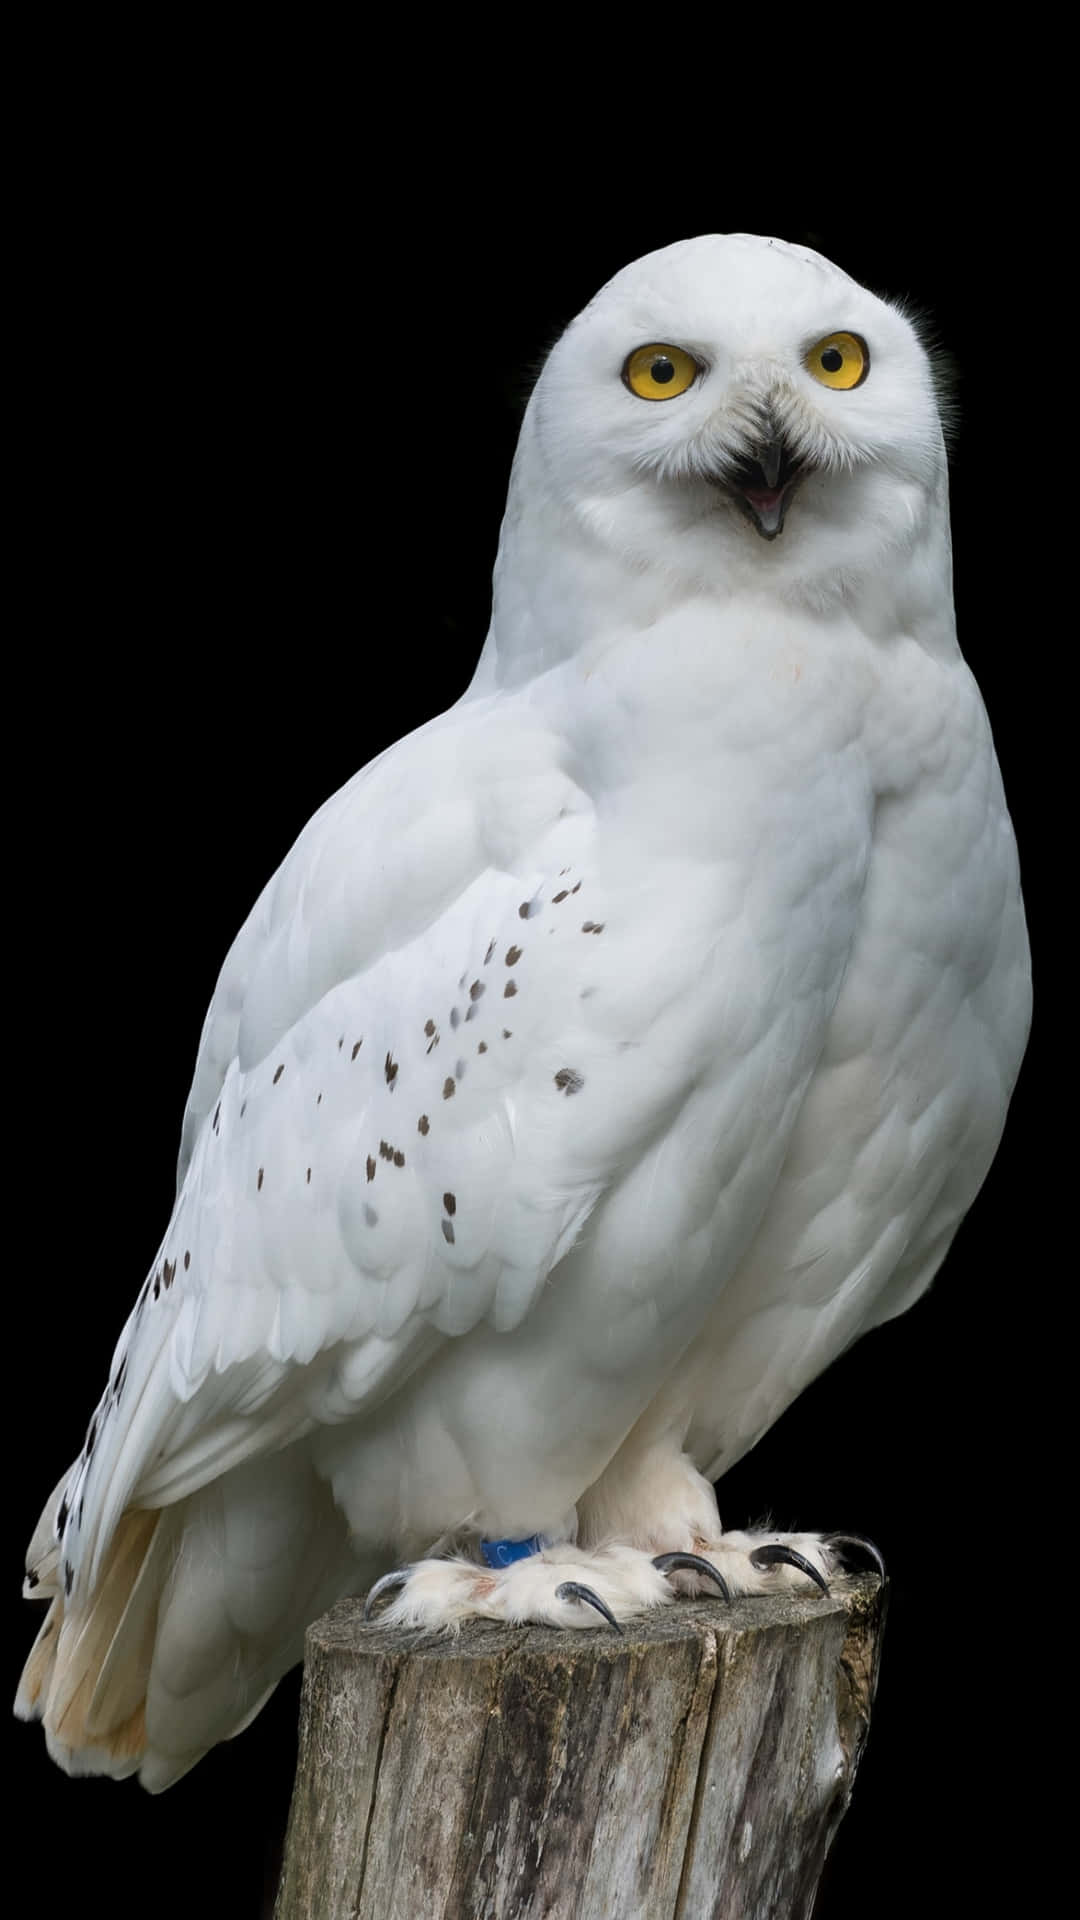 A White Owl Sitting On A Wooden Stump Background